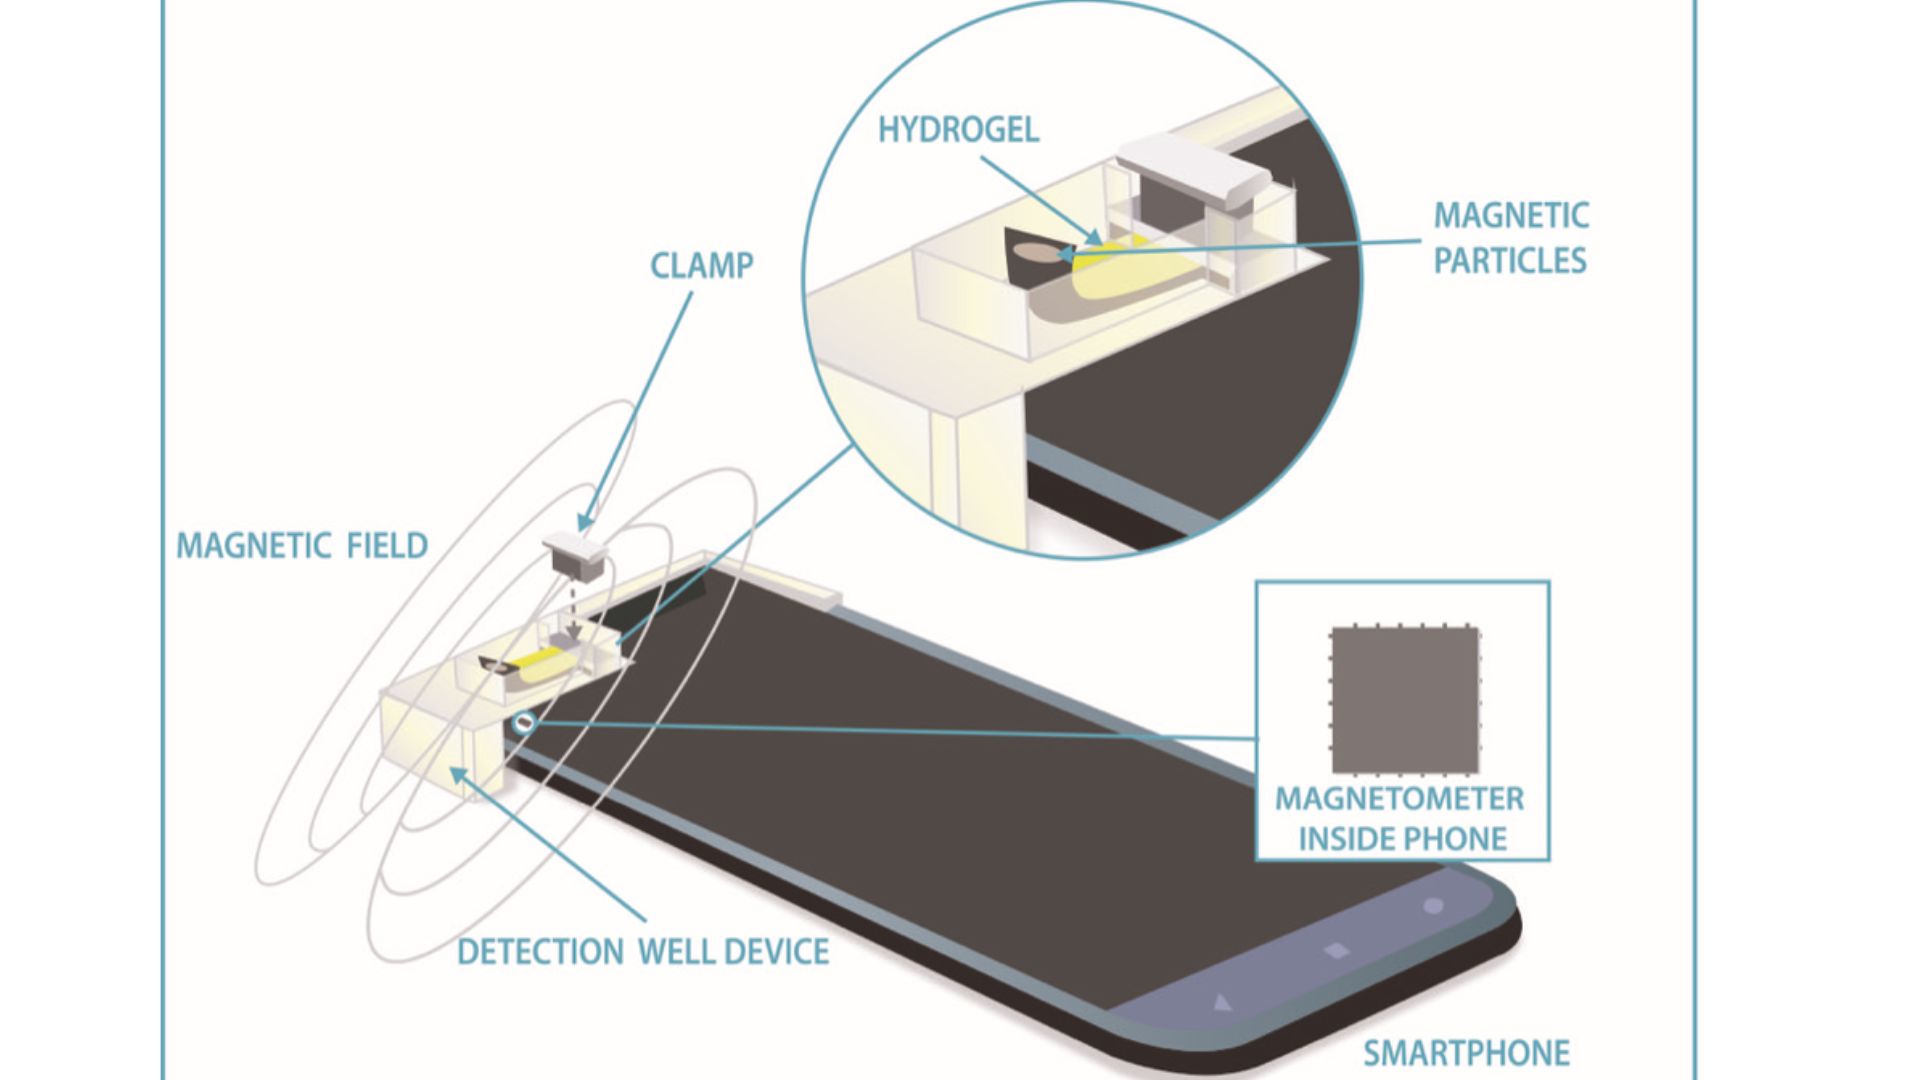 Illustration depicts smartphone magnetometer analyzing biomedical properties in liquid samples via magnetized hydrogel.